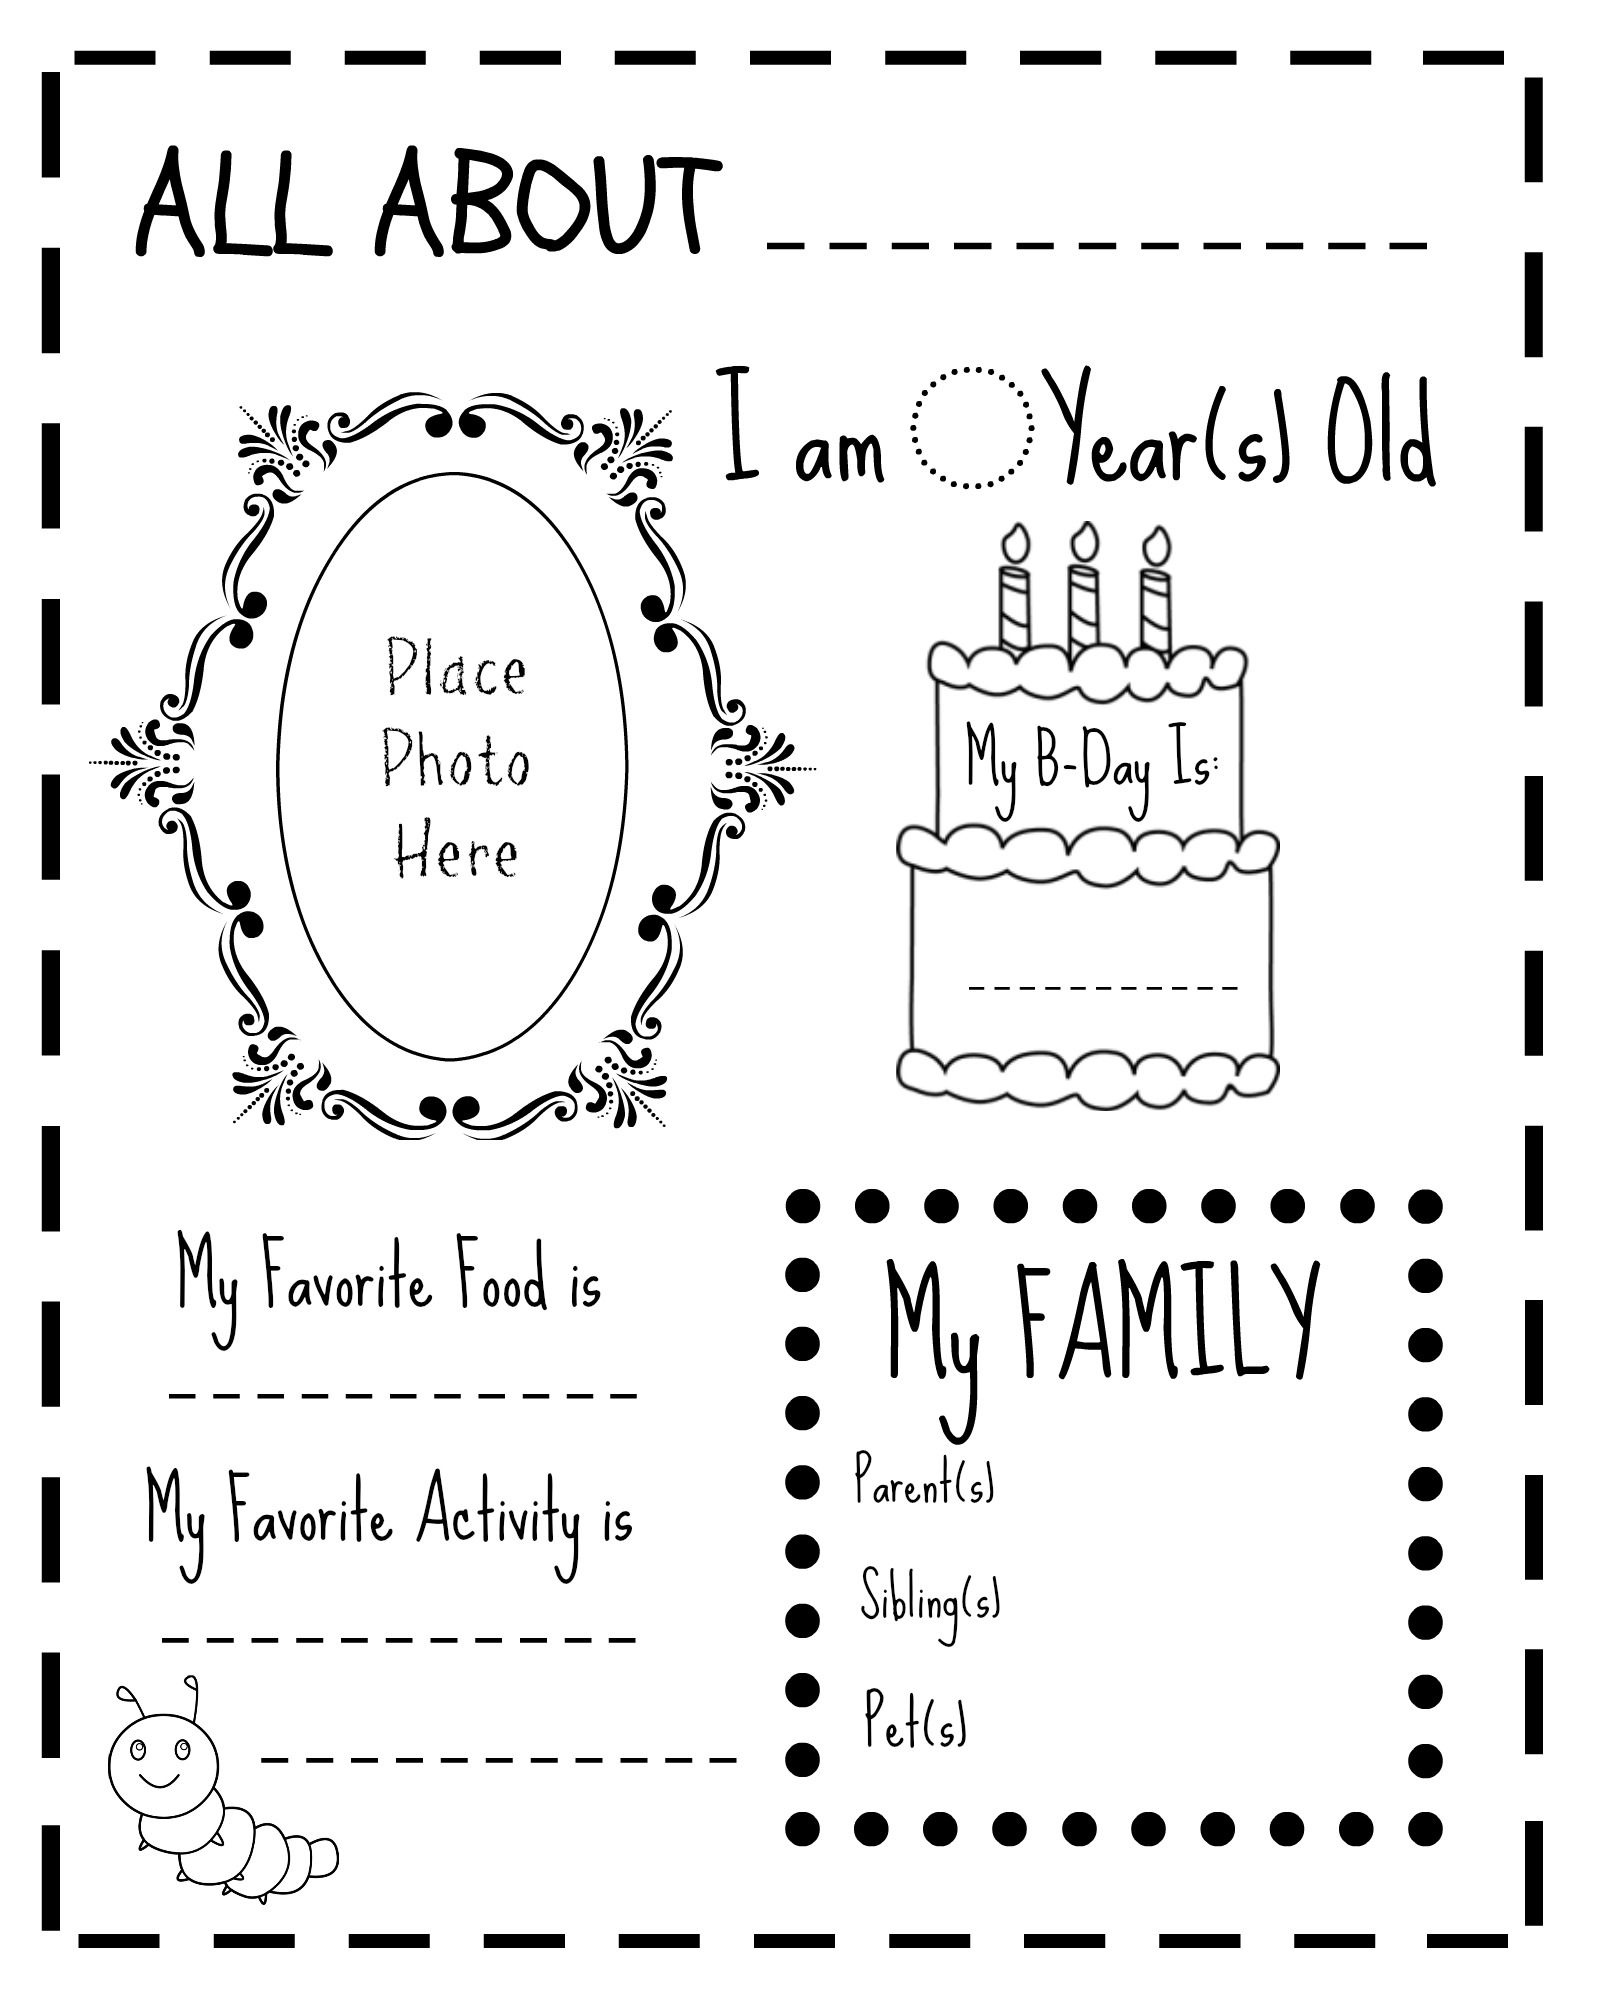 get-to-know-me-activity-sheet-all-about-me-worksheets